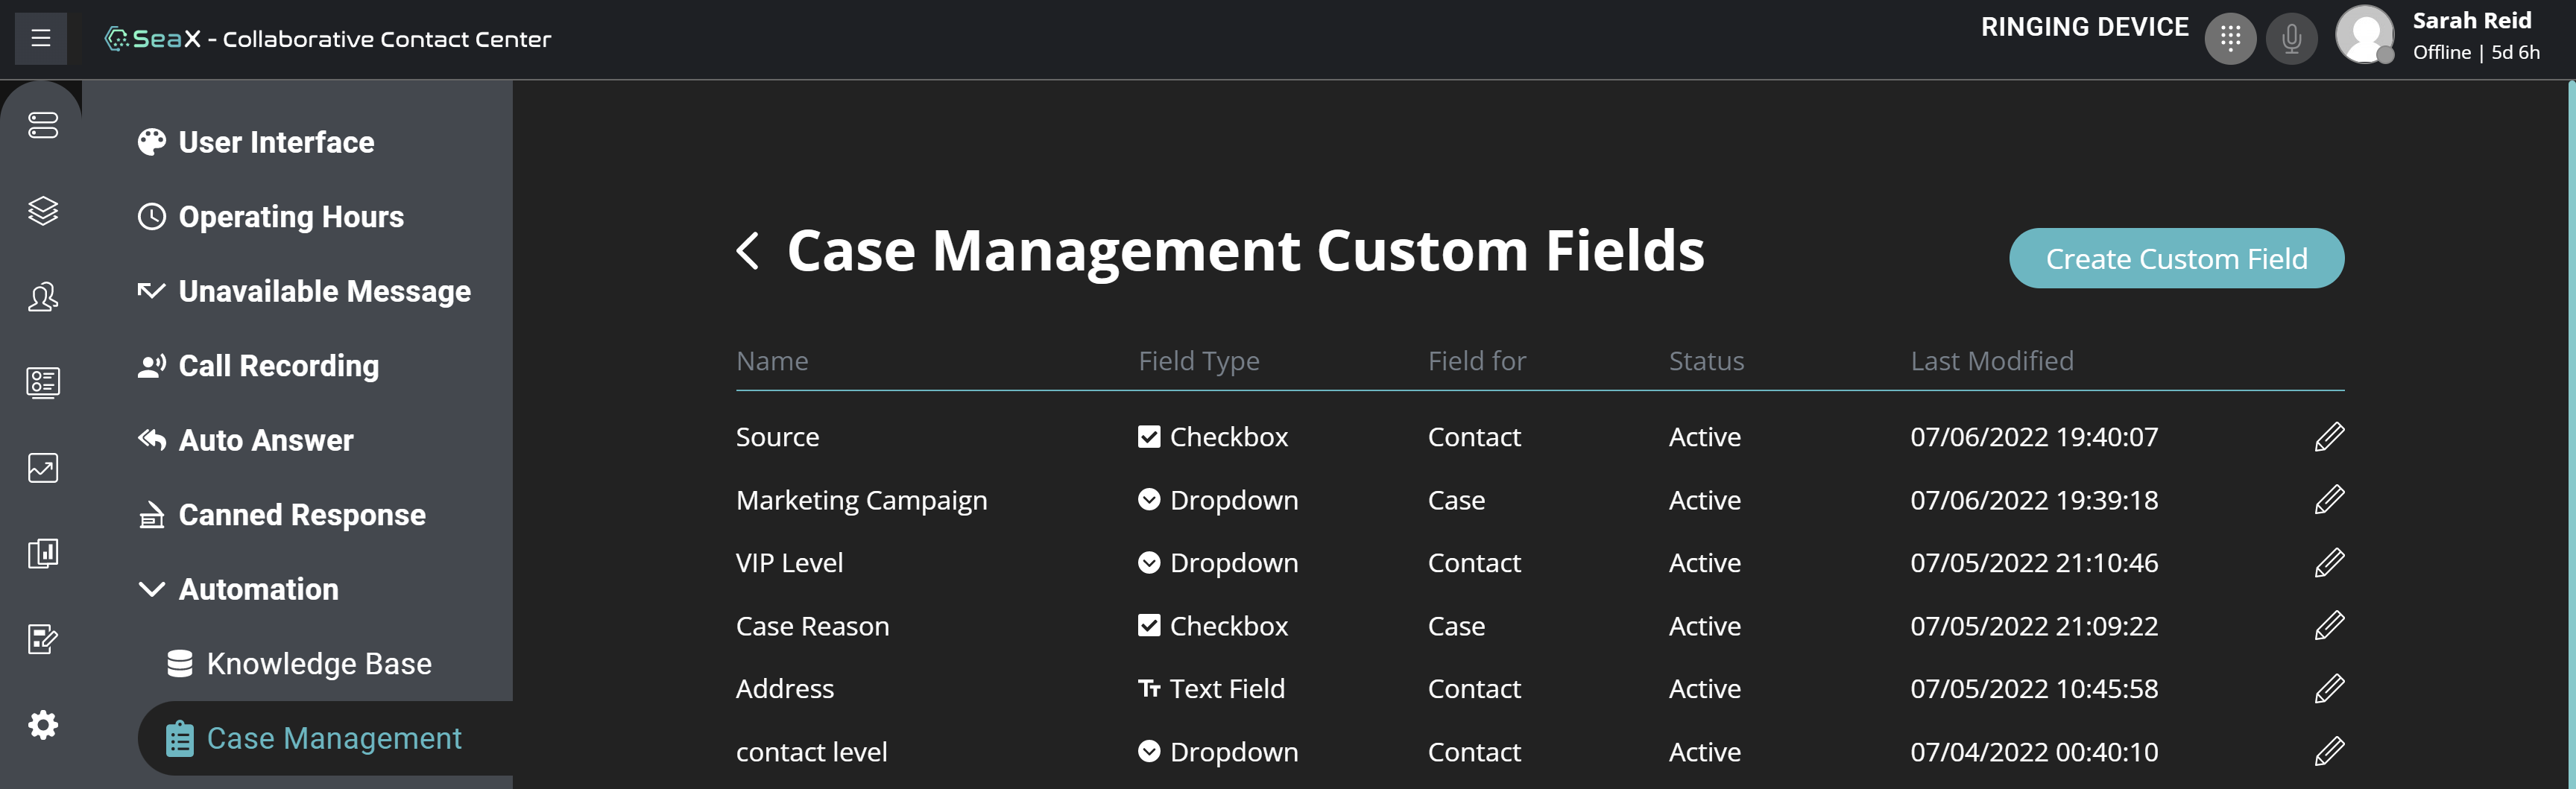 Define custom data fields to store the customer and case information that is important to you.